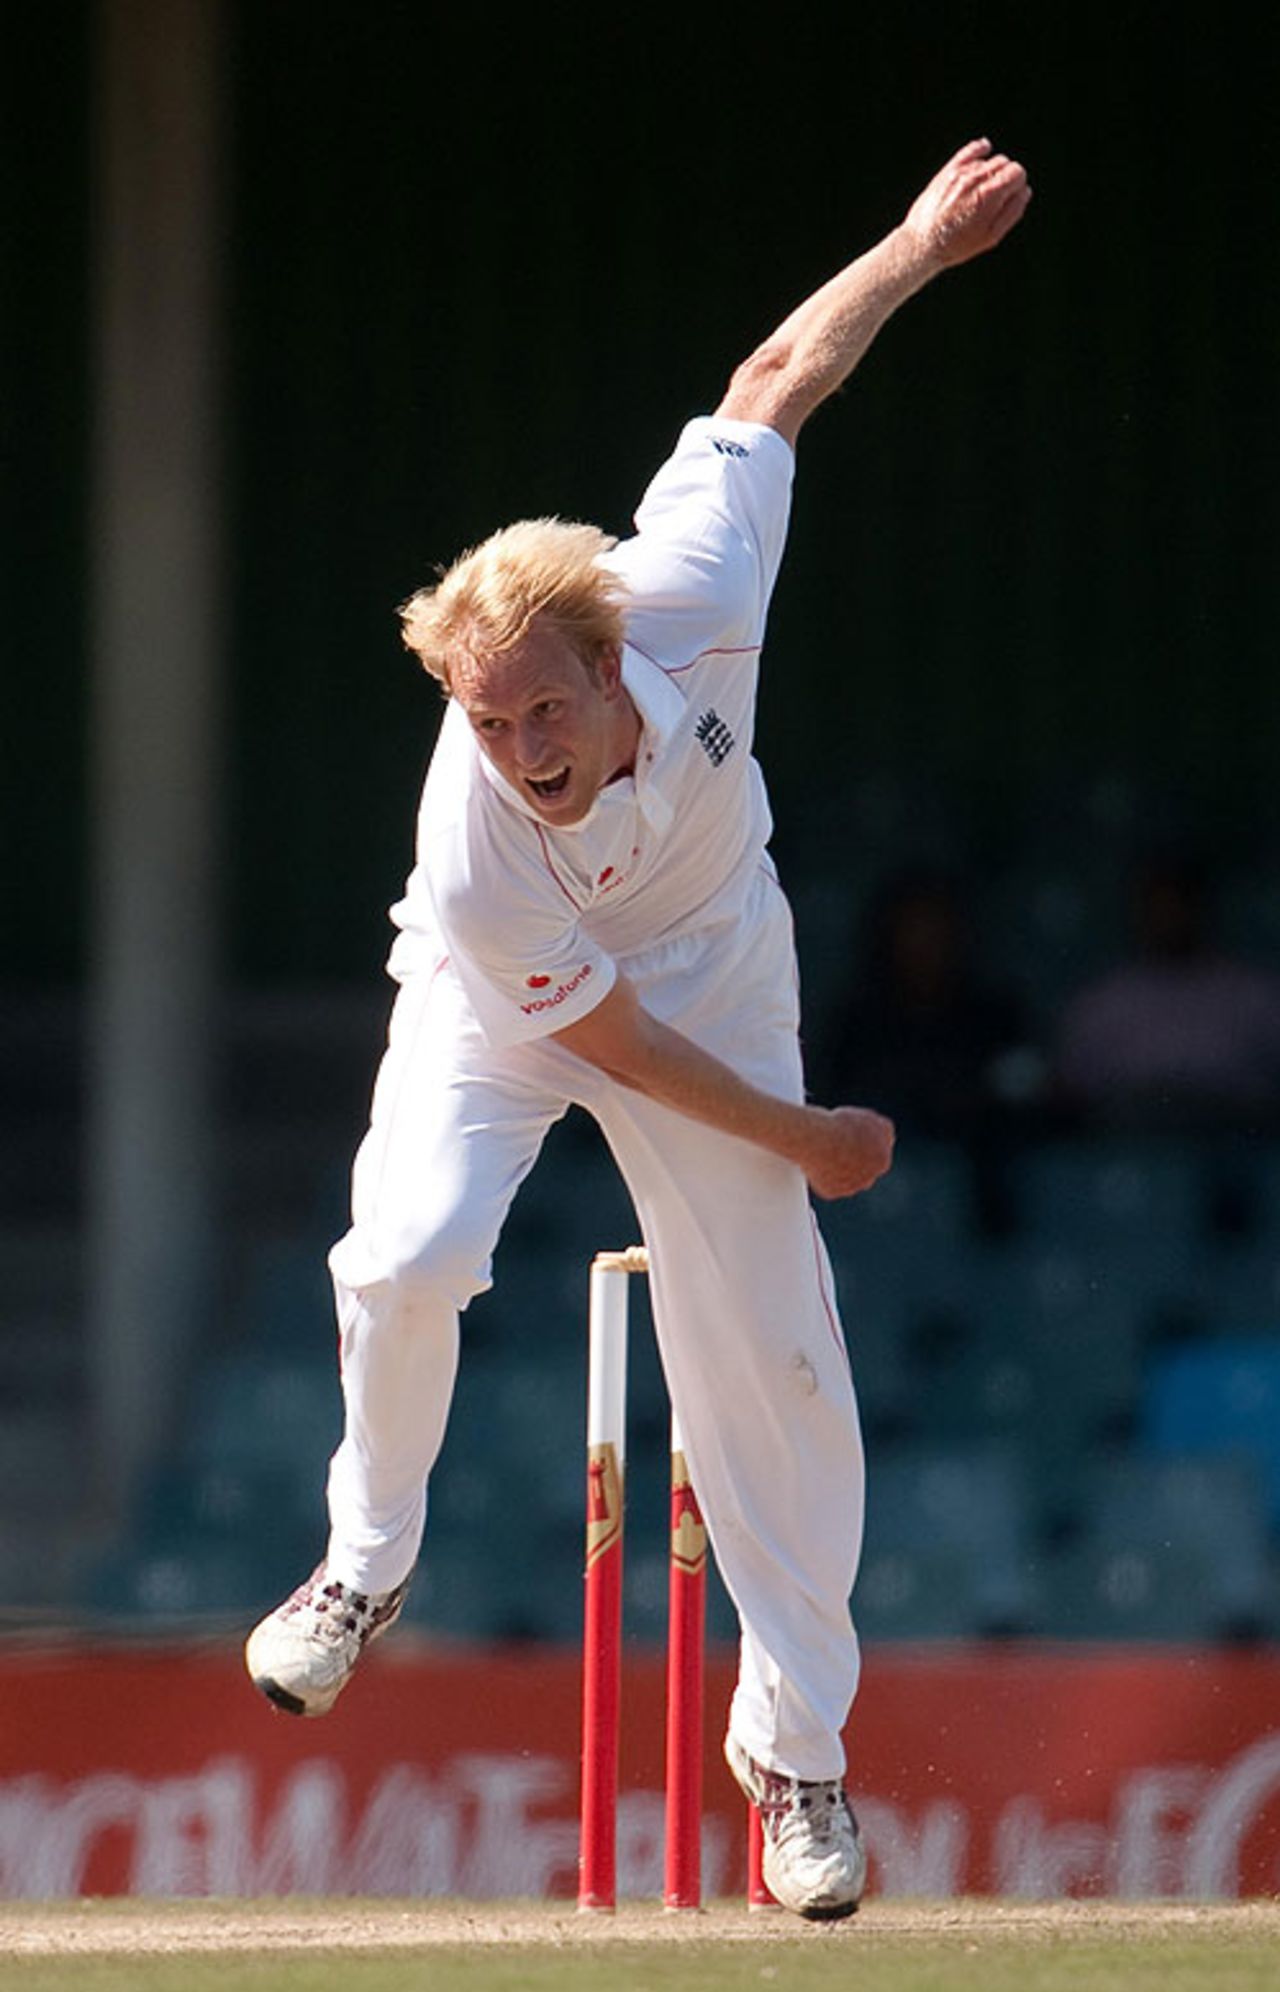 Mark Davies bowls during his first outing for England, South African Invitational XI v England XI at East London, December 10, 2009 